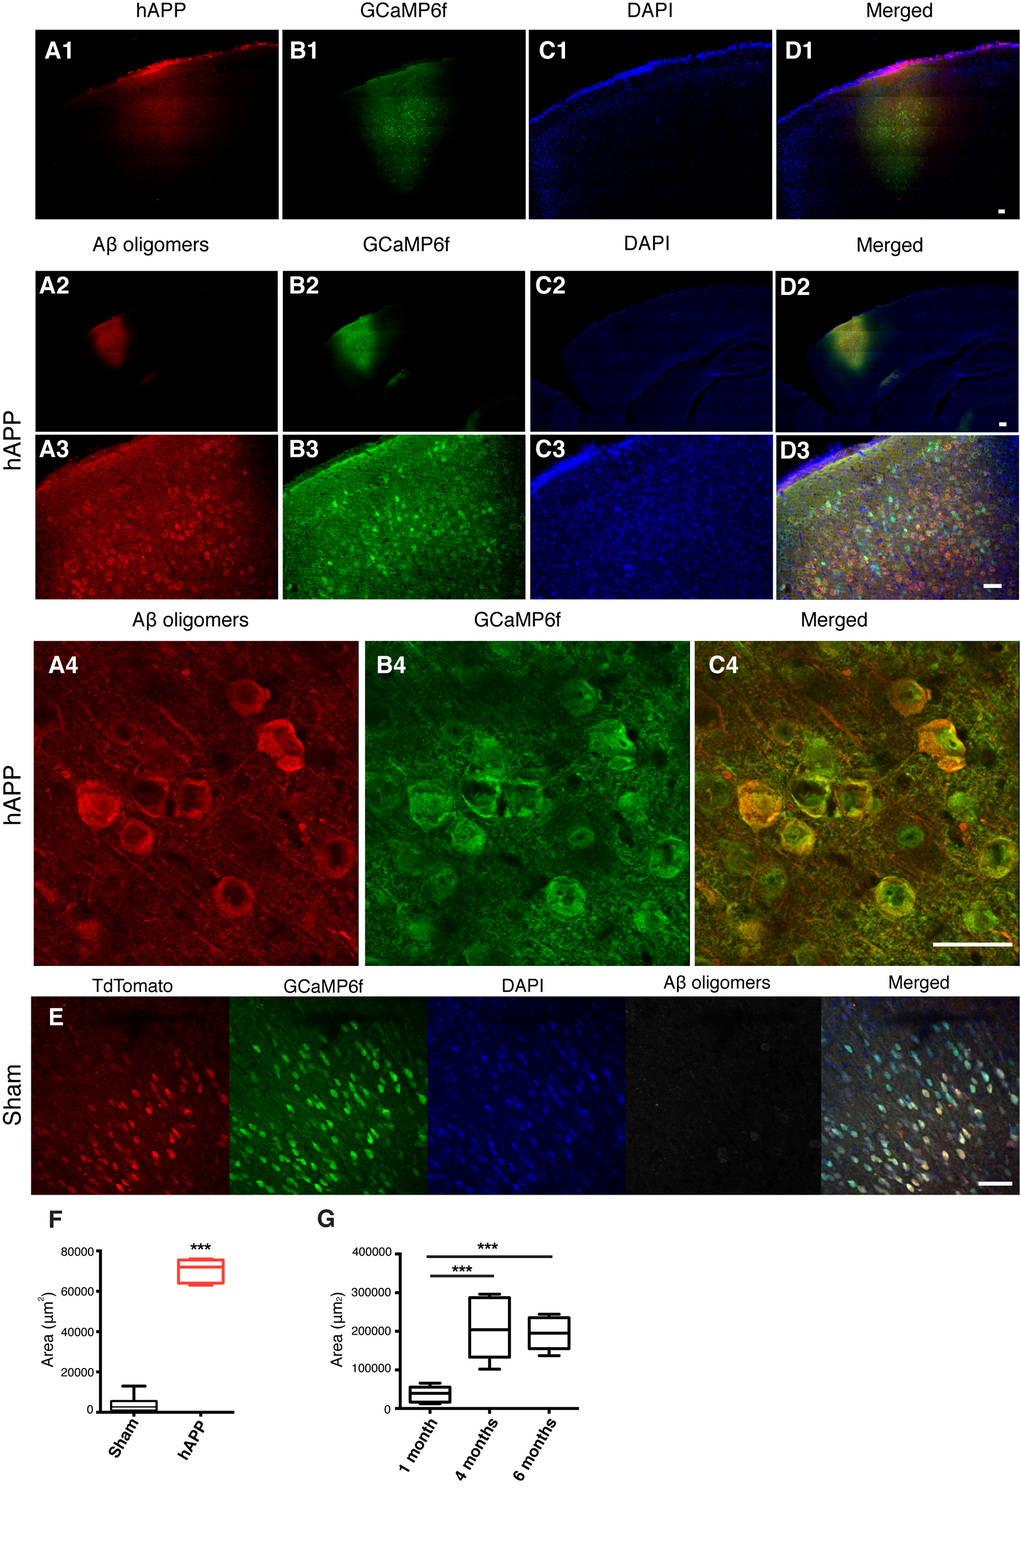 Detection of hAPP and Aβ oligomers in the PFC at 1 mpi of AAV-hAPP-SLA in WT mice.In vivo detection of hAPP (A1), Aβ oligomers (A2-A4), GCaMP6f (B), DAPI (C) and merged (D). Immunofluorescence images at low (1, 2), medium (3) and high (4) magnification. Scale bars = (1) 100 µm, (2, 3) 200 µm and (4) 50 µm. (E) Aβ oligomers were not detected in sham mice injected with the control vector AAV-tdTomato. Scale bar = 50 µm. (F) Quantification of Aβ oligomer diffusion in sham and hAPP mice. (G) Quantification of Aβ oligomer diffusion in hAPP mice at three different timepoints. (Student’s test, P 